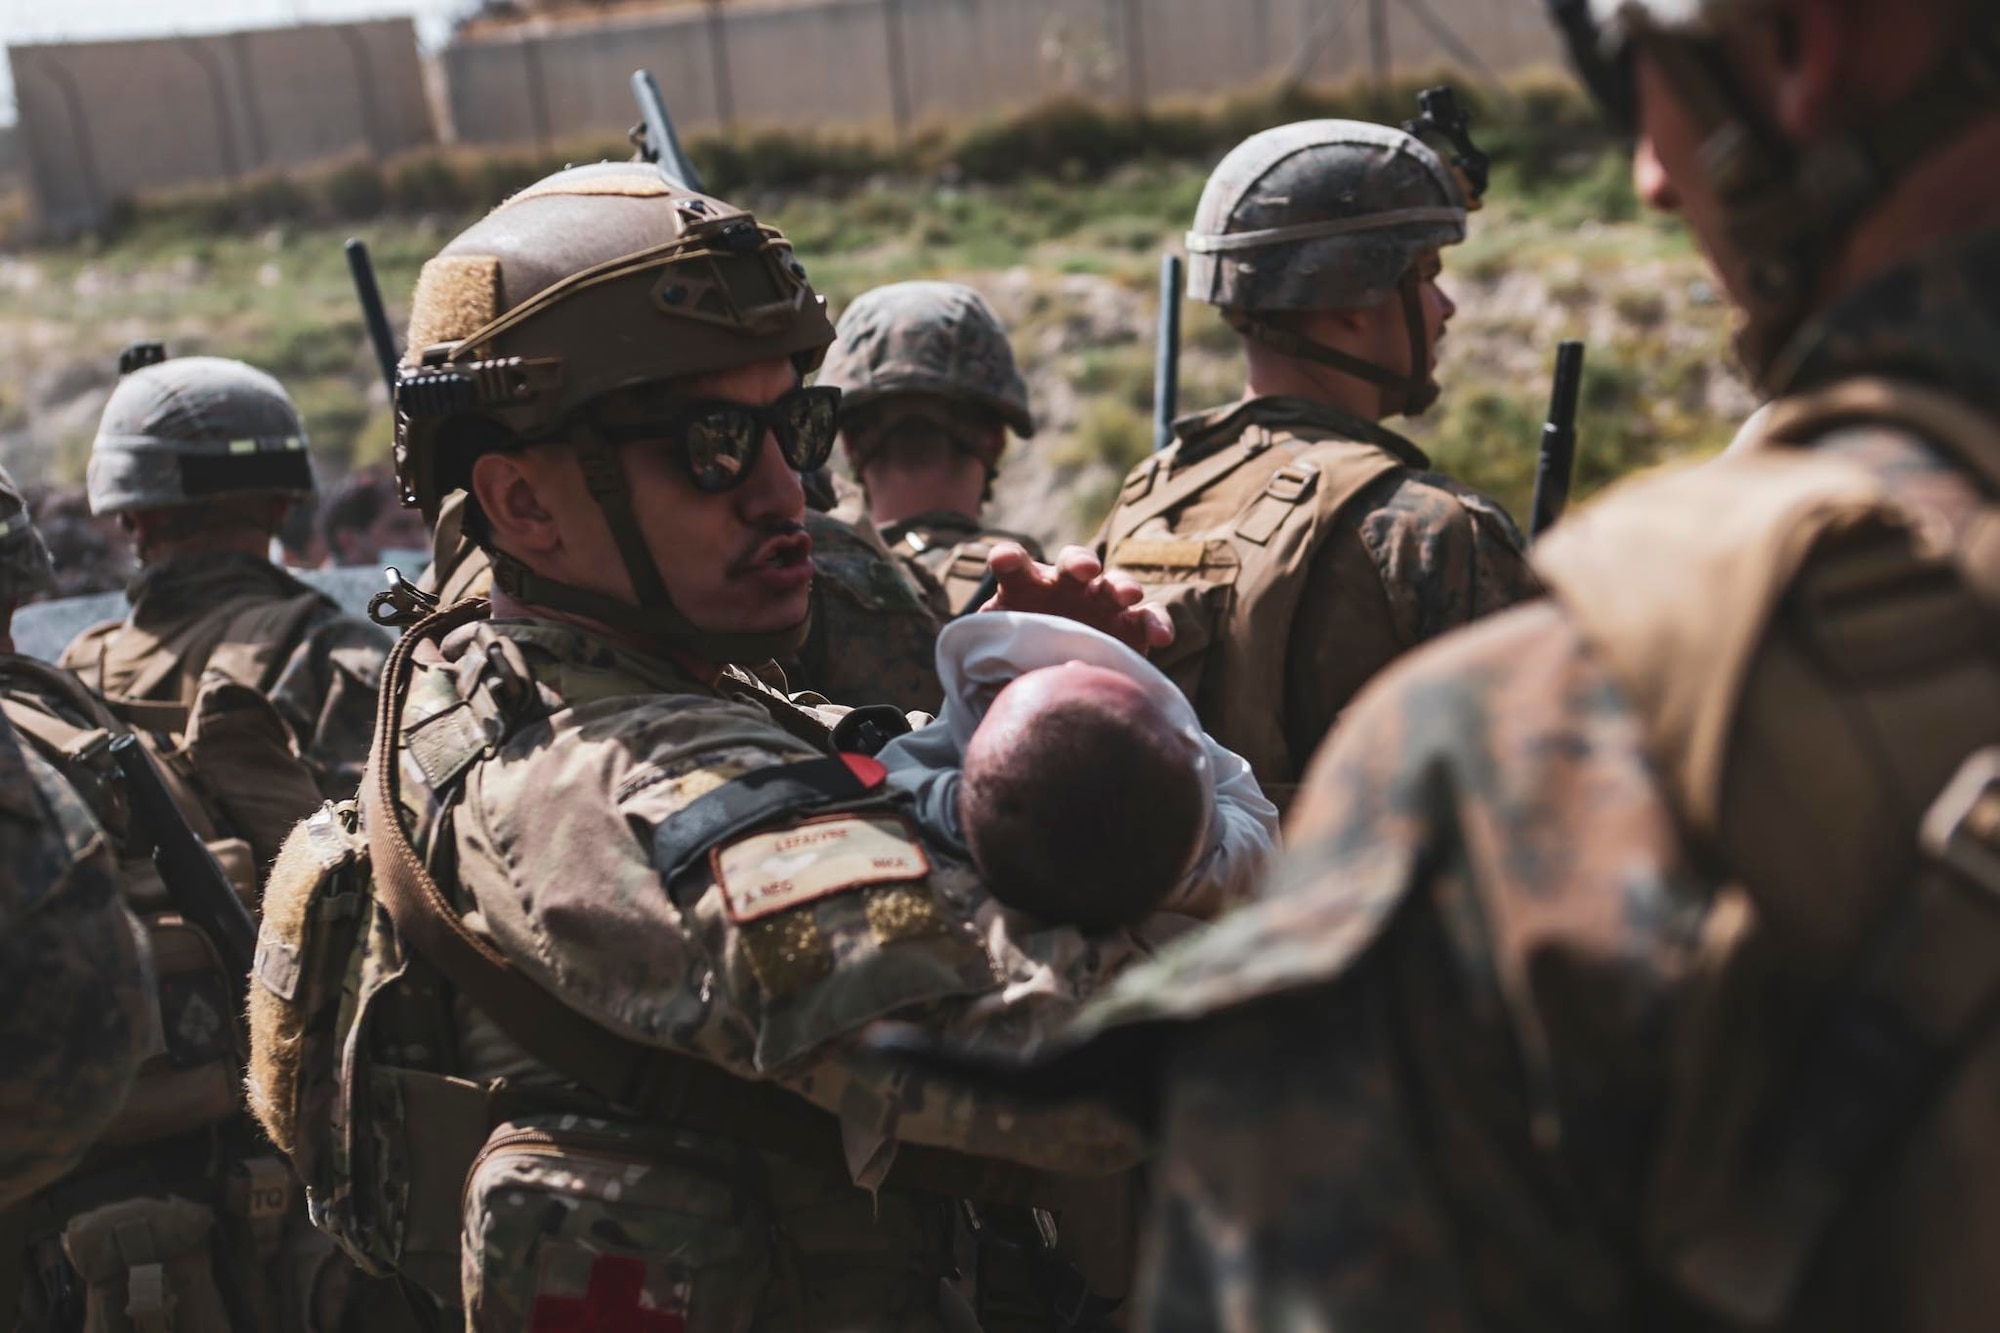 An Airman comforts a baby